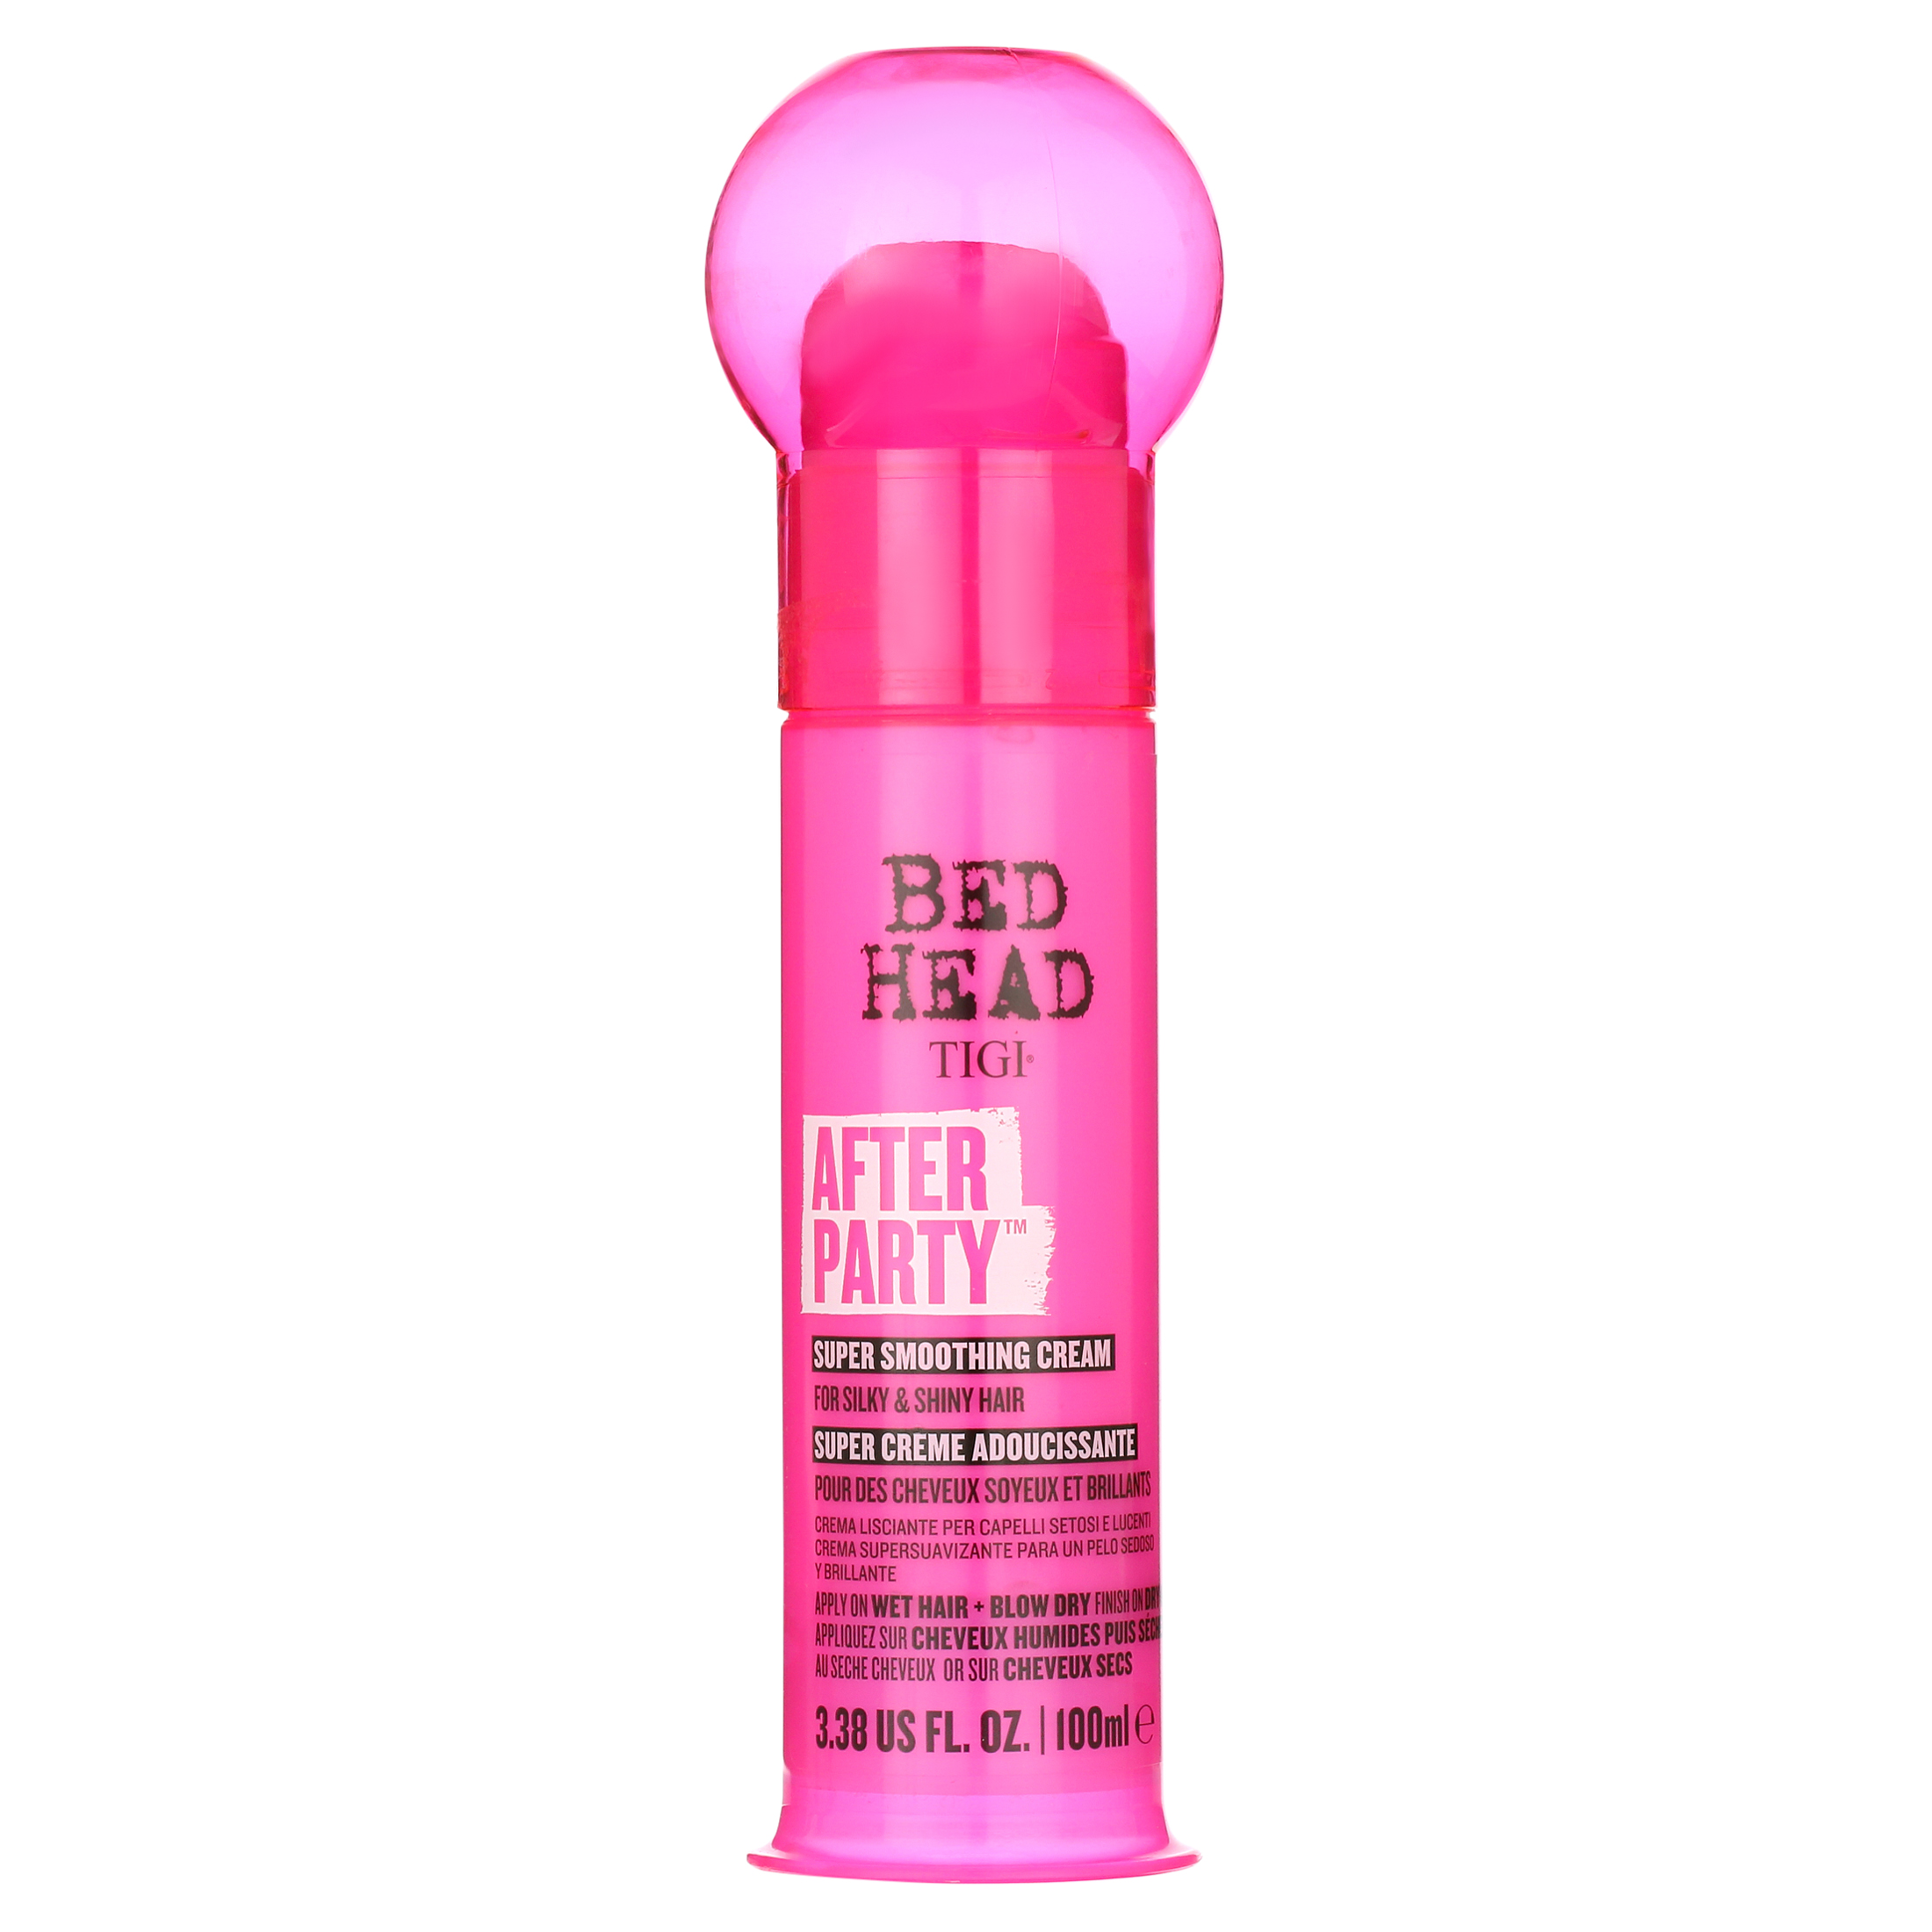 Tigi Bed Head After Party Smoothing Cream, 3.4 oz - image 1 of 5